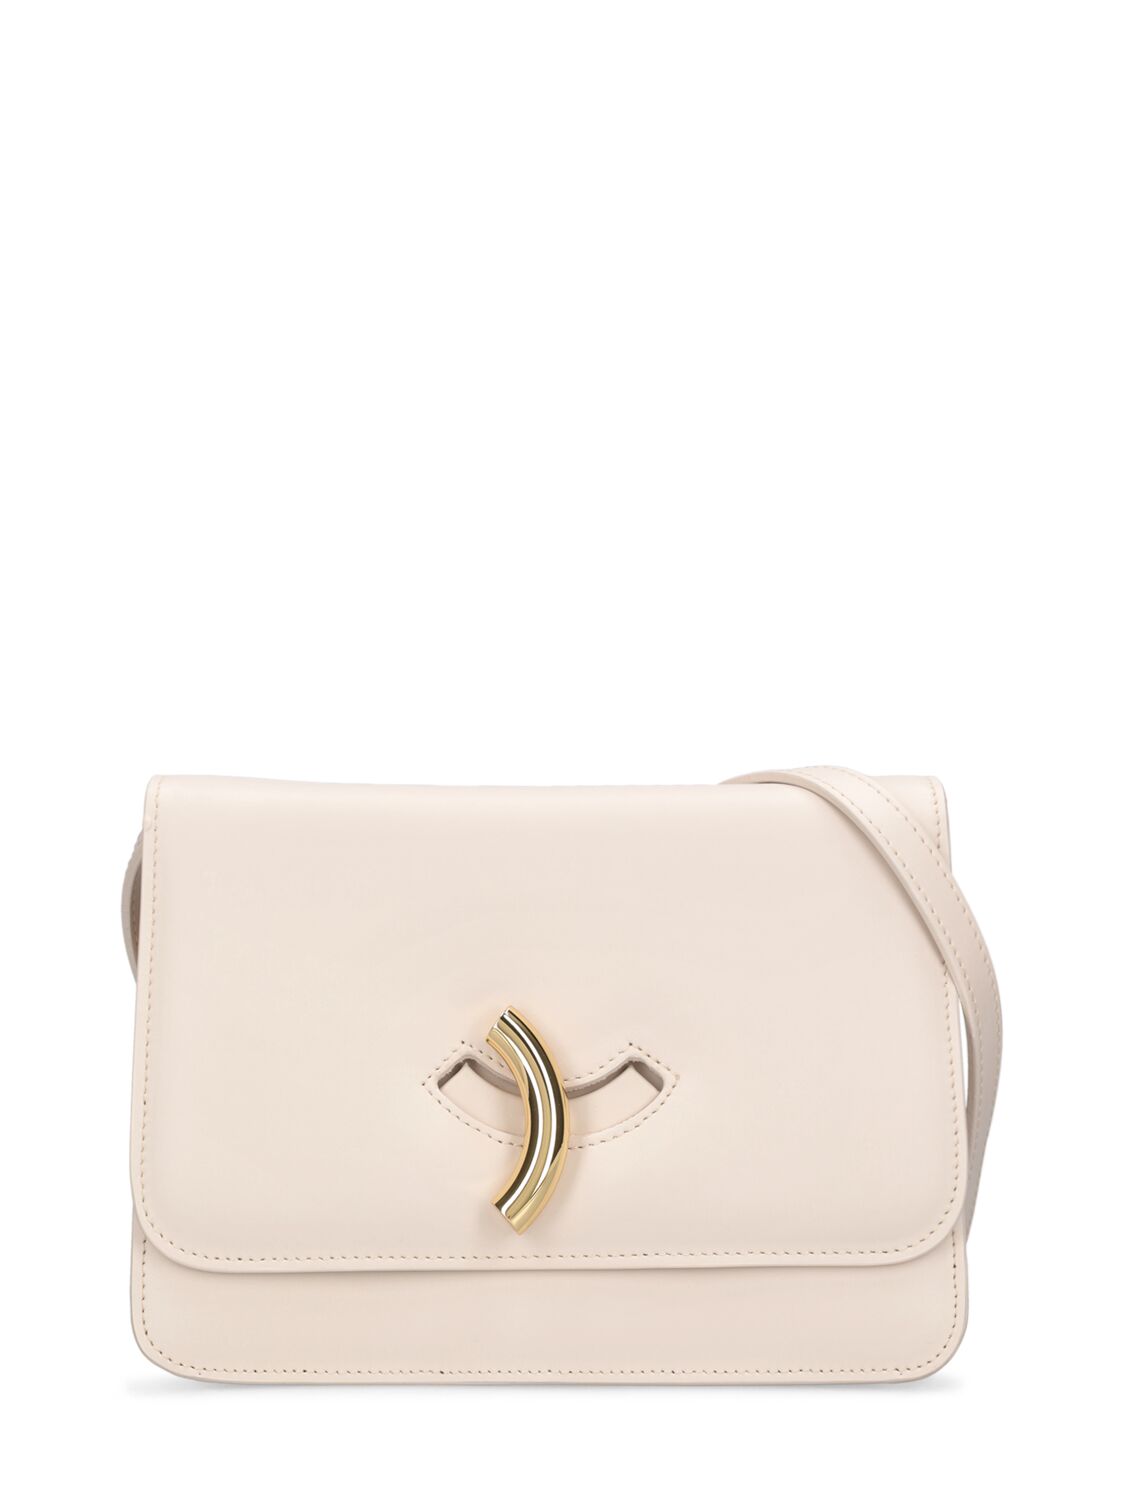 Little Liffner Maccheroni Grained Leather Bag In Marble